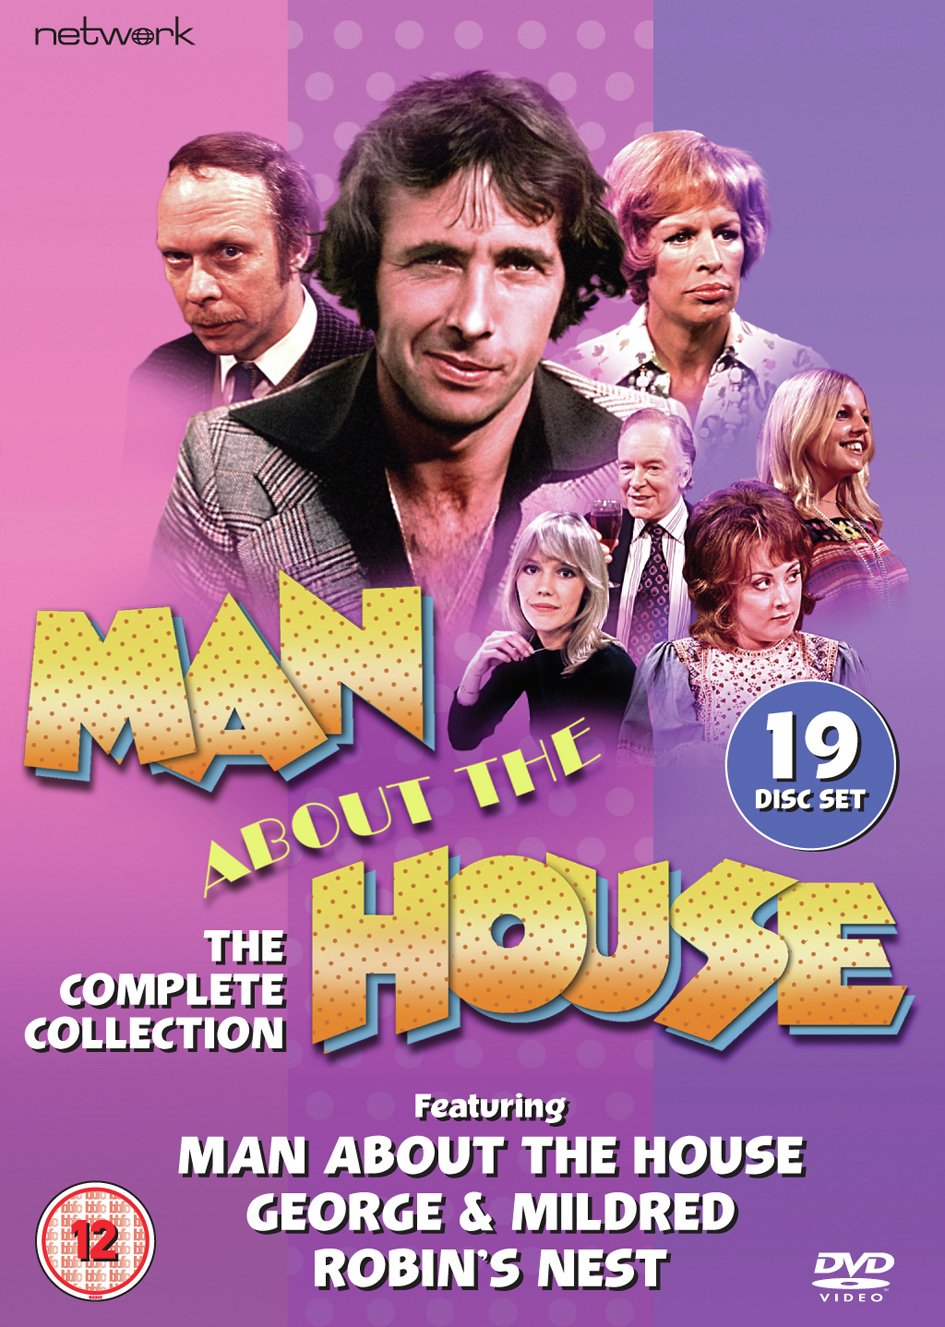 Man About The House: The Complete Collection DVD Box Set Review